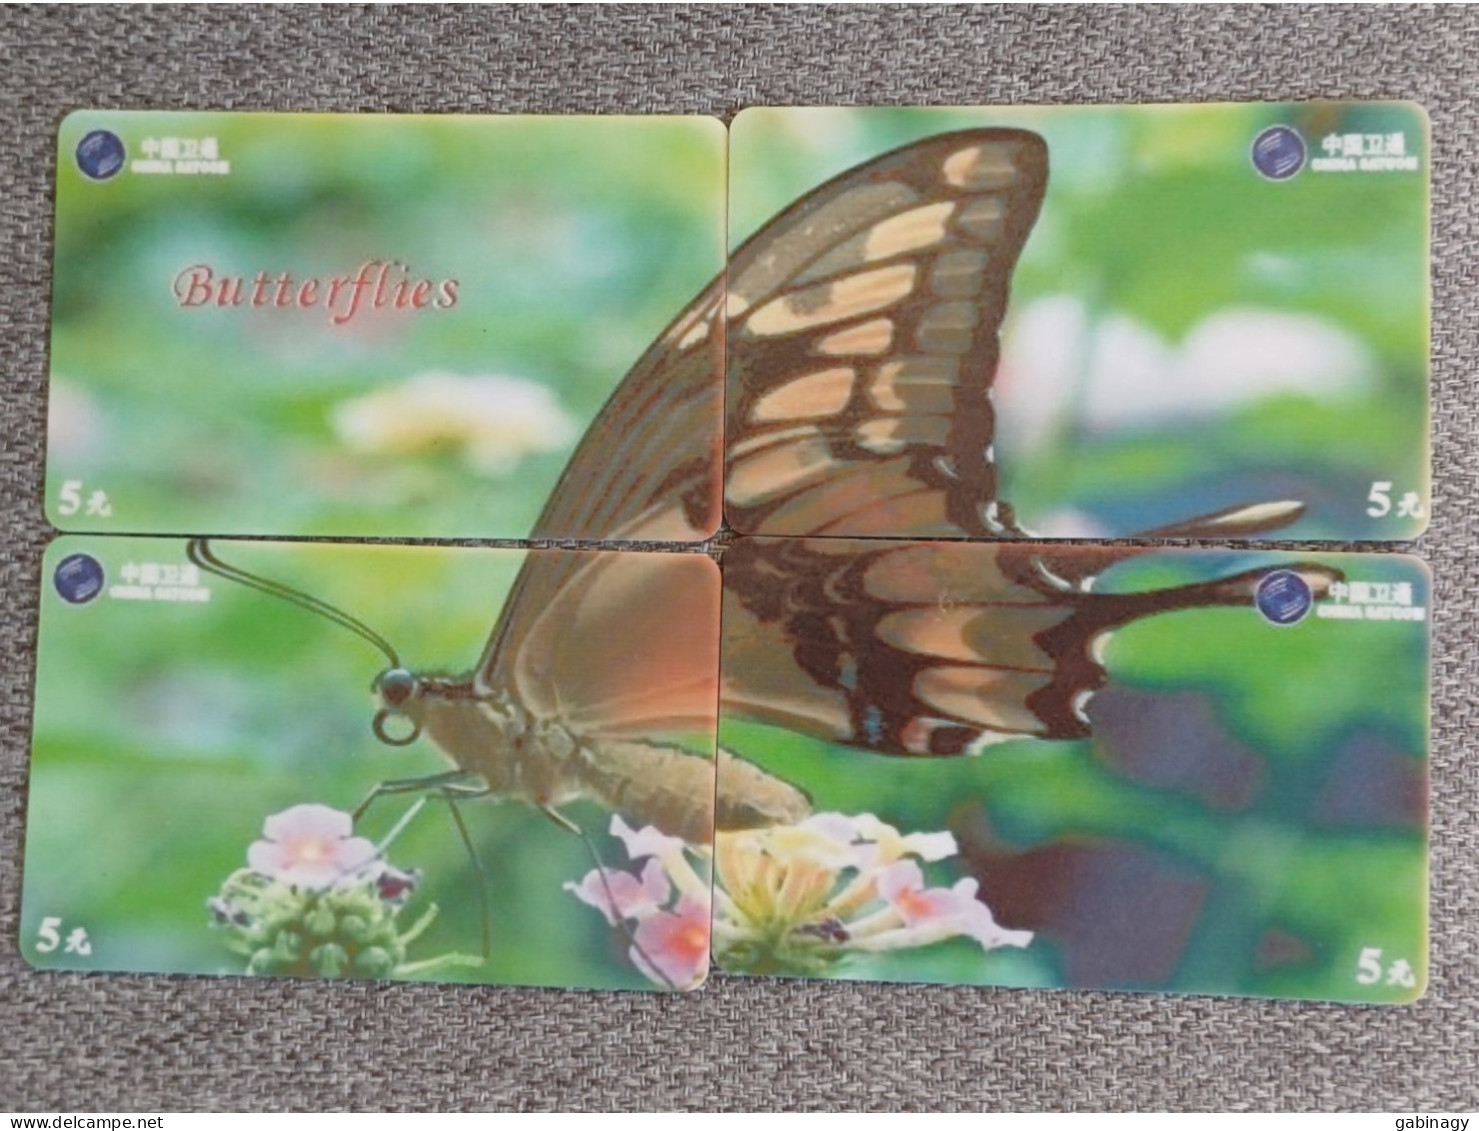 CHINA - BUTTERFLY-10 - PUZZLE SET OF 4 CARDS - China